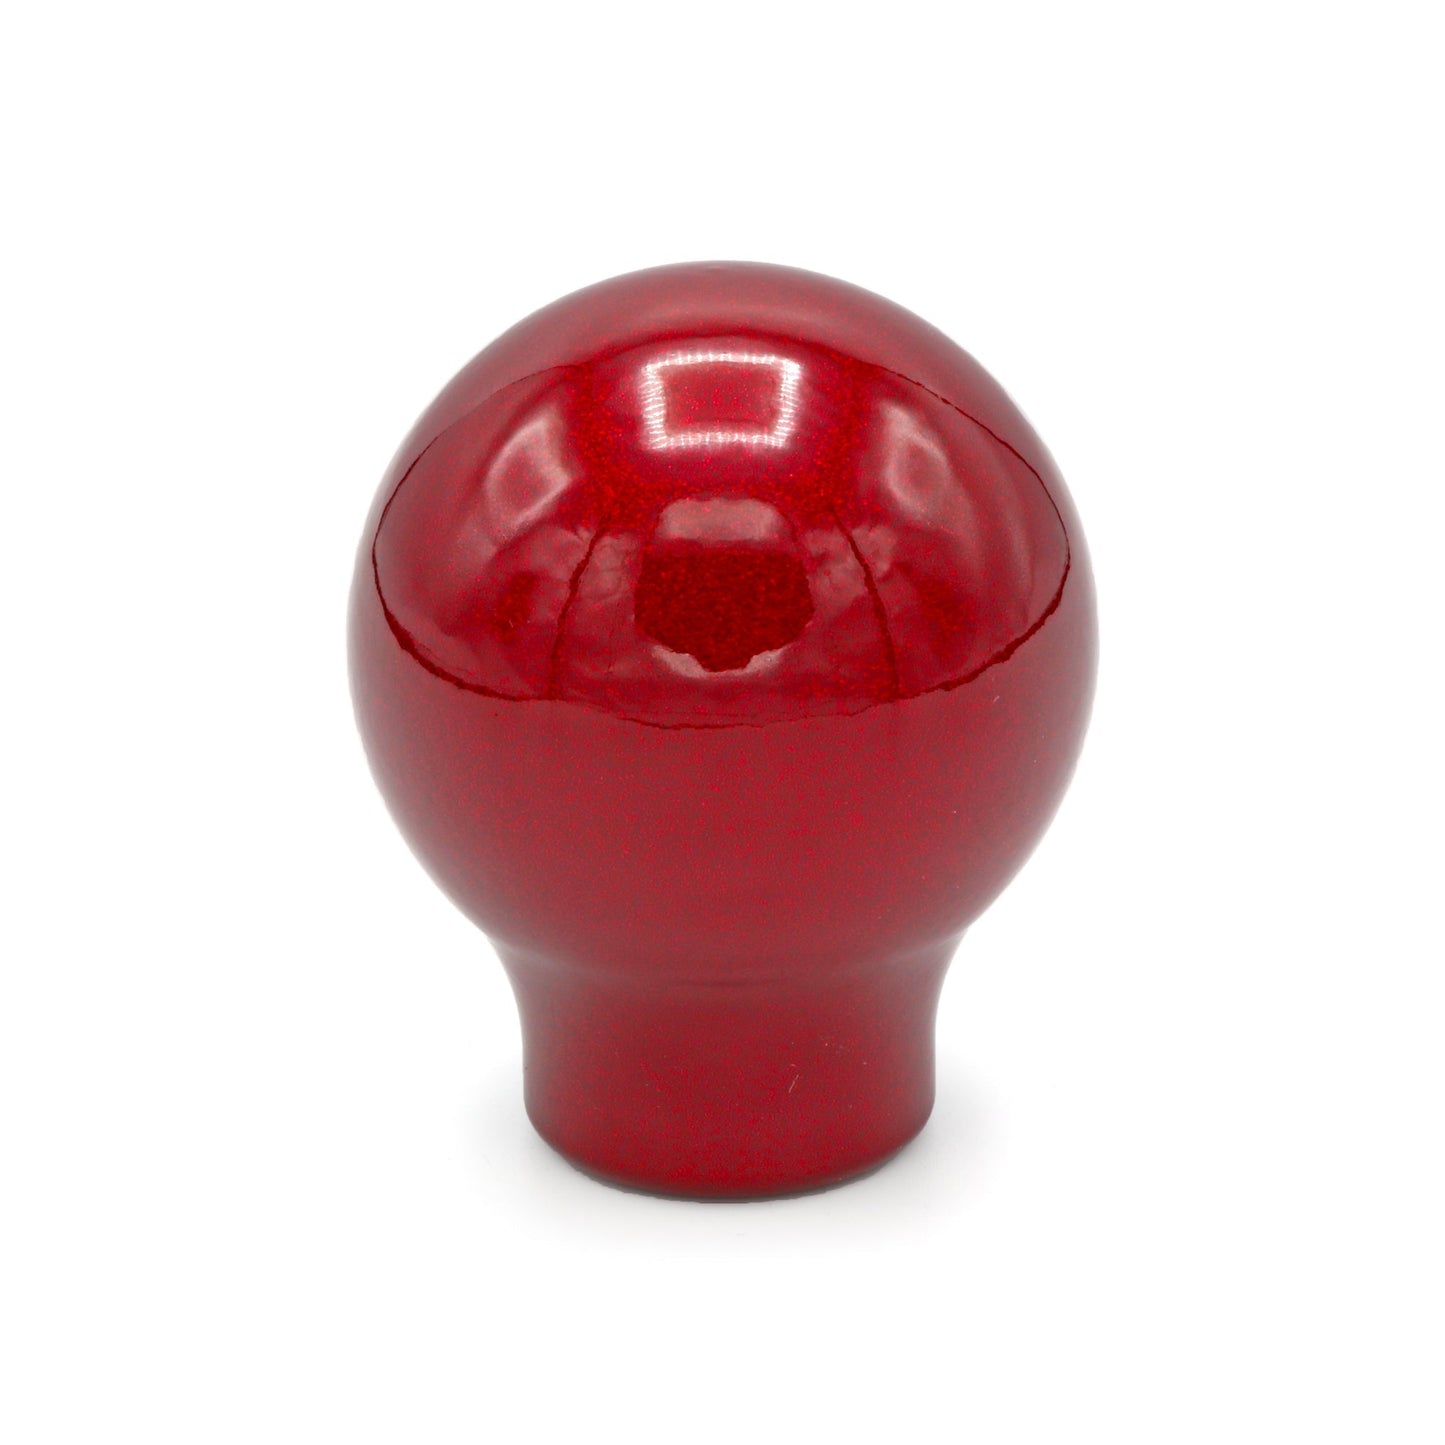 Billetworkz - Weighted Shift Knob - Candy Red (5 SPEED)